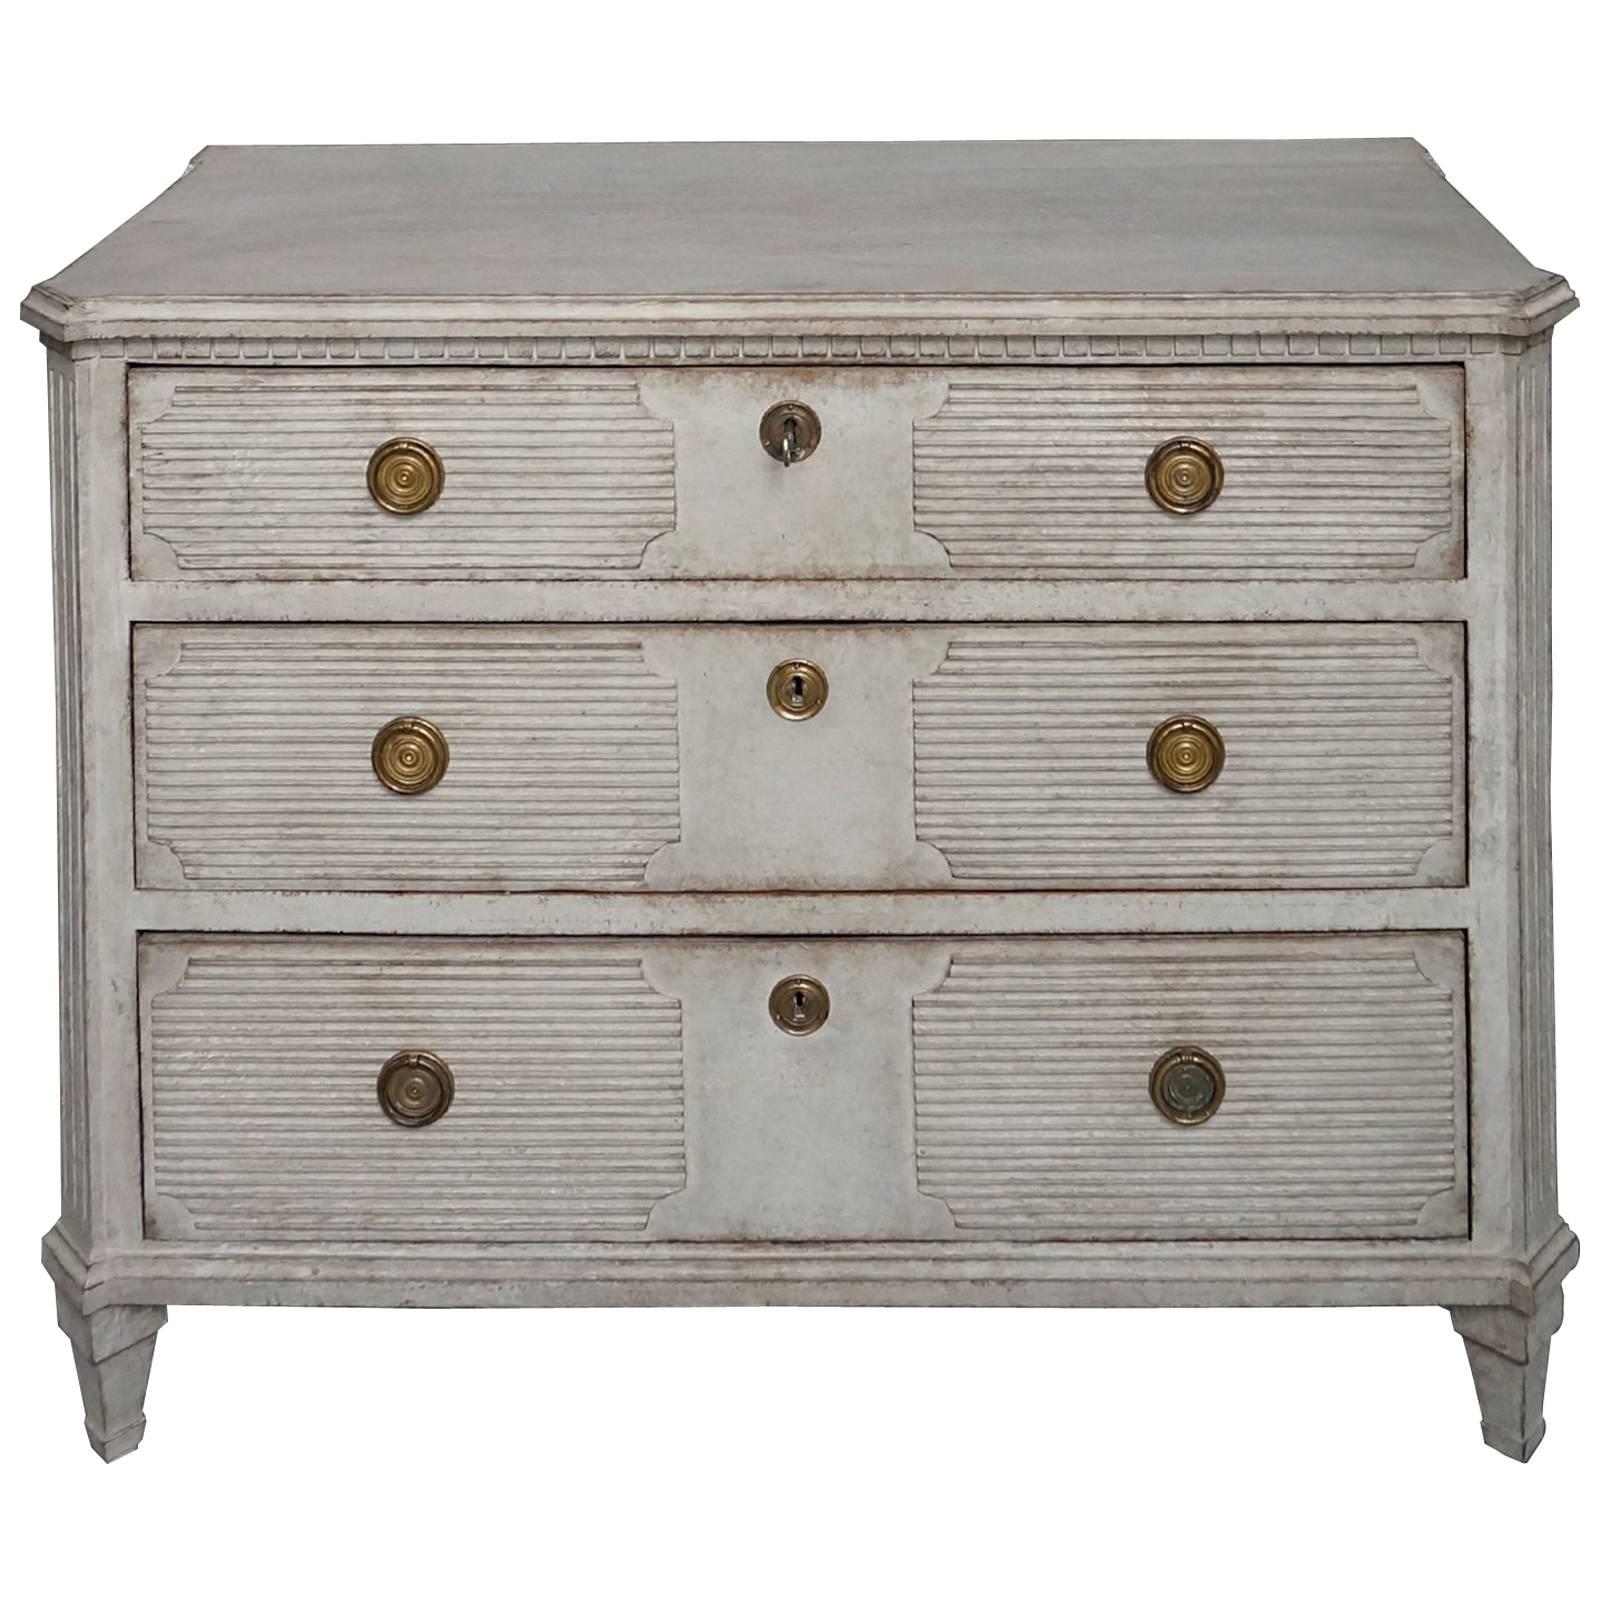 Reeded Swedish Commode in the Neoclassical Style